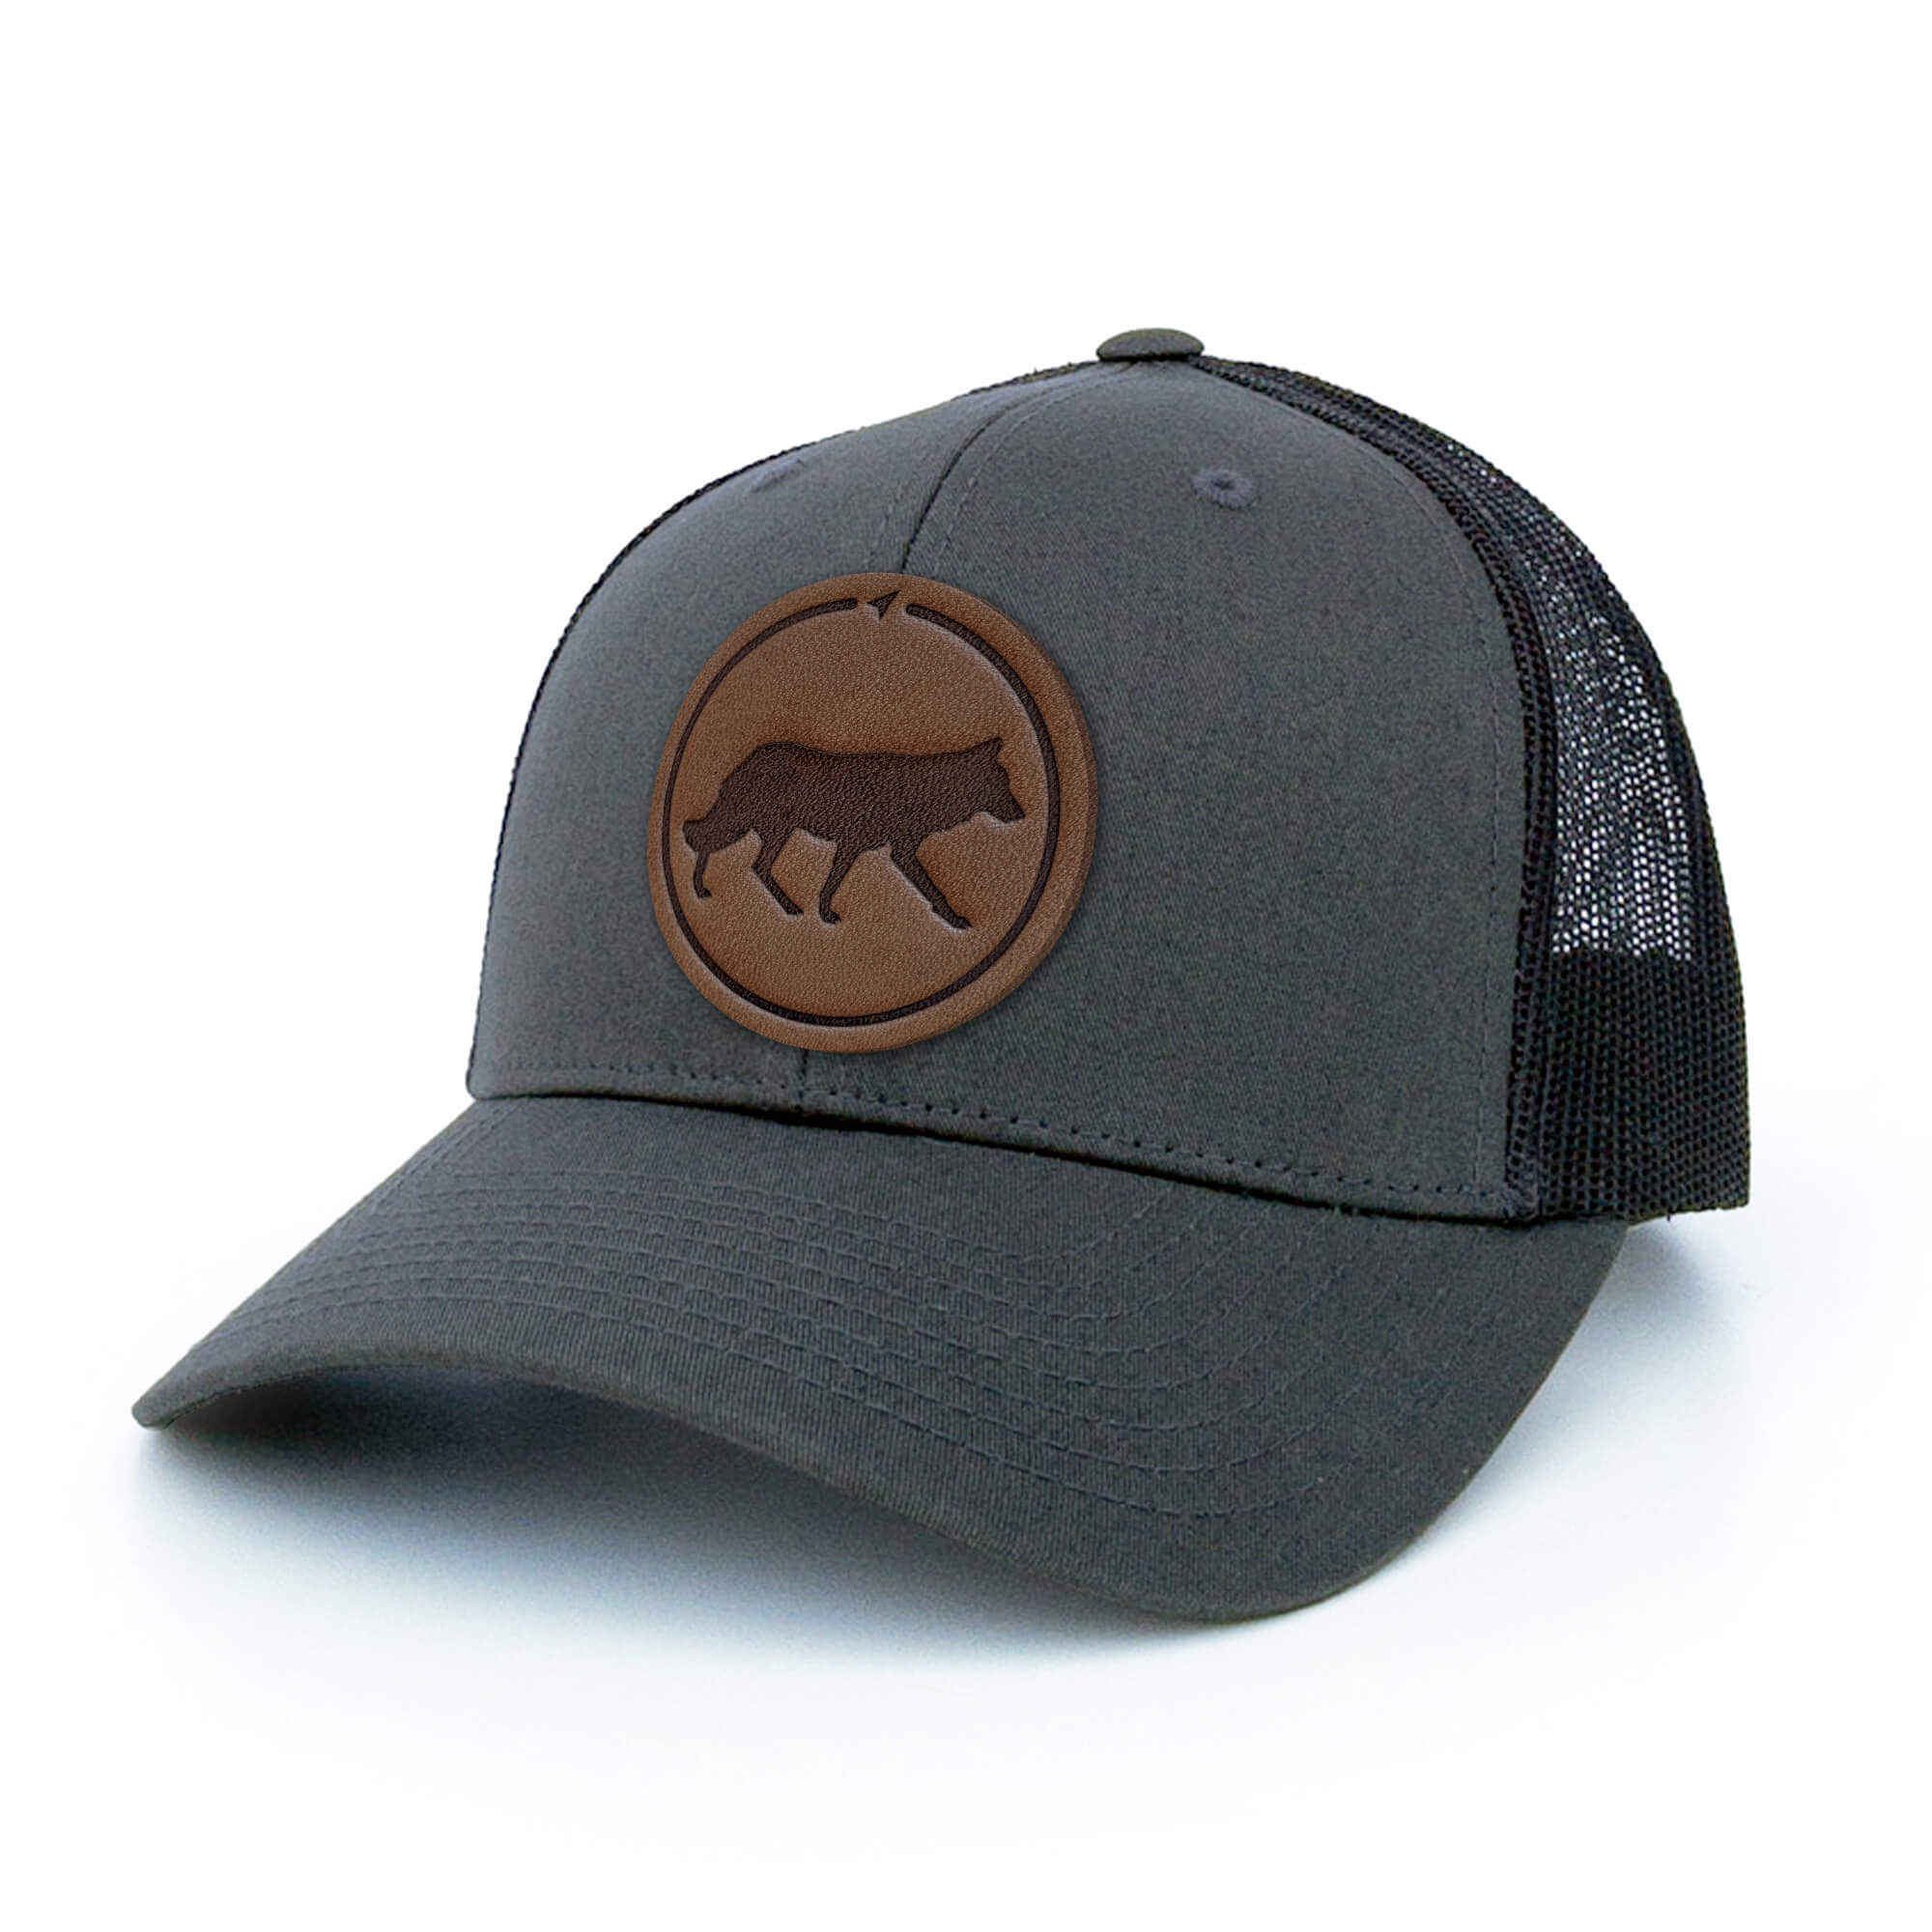 Charcoal trucker hat with full-grain leather patch of Wolf | BLACK-004-007, CHARC-004-007, NAVY-004-007, HGREY-004-007, MOSS-004-007, BROWN-004-007